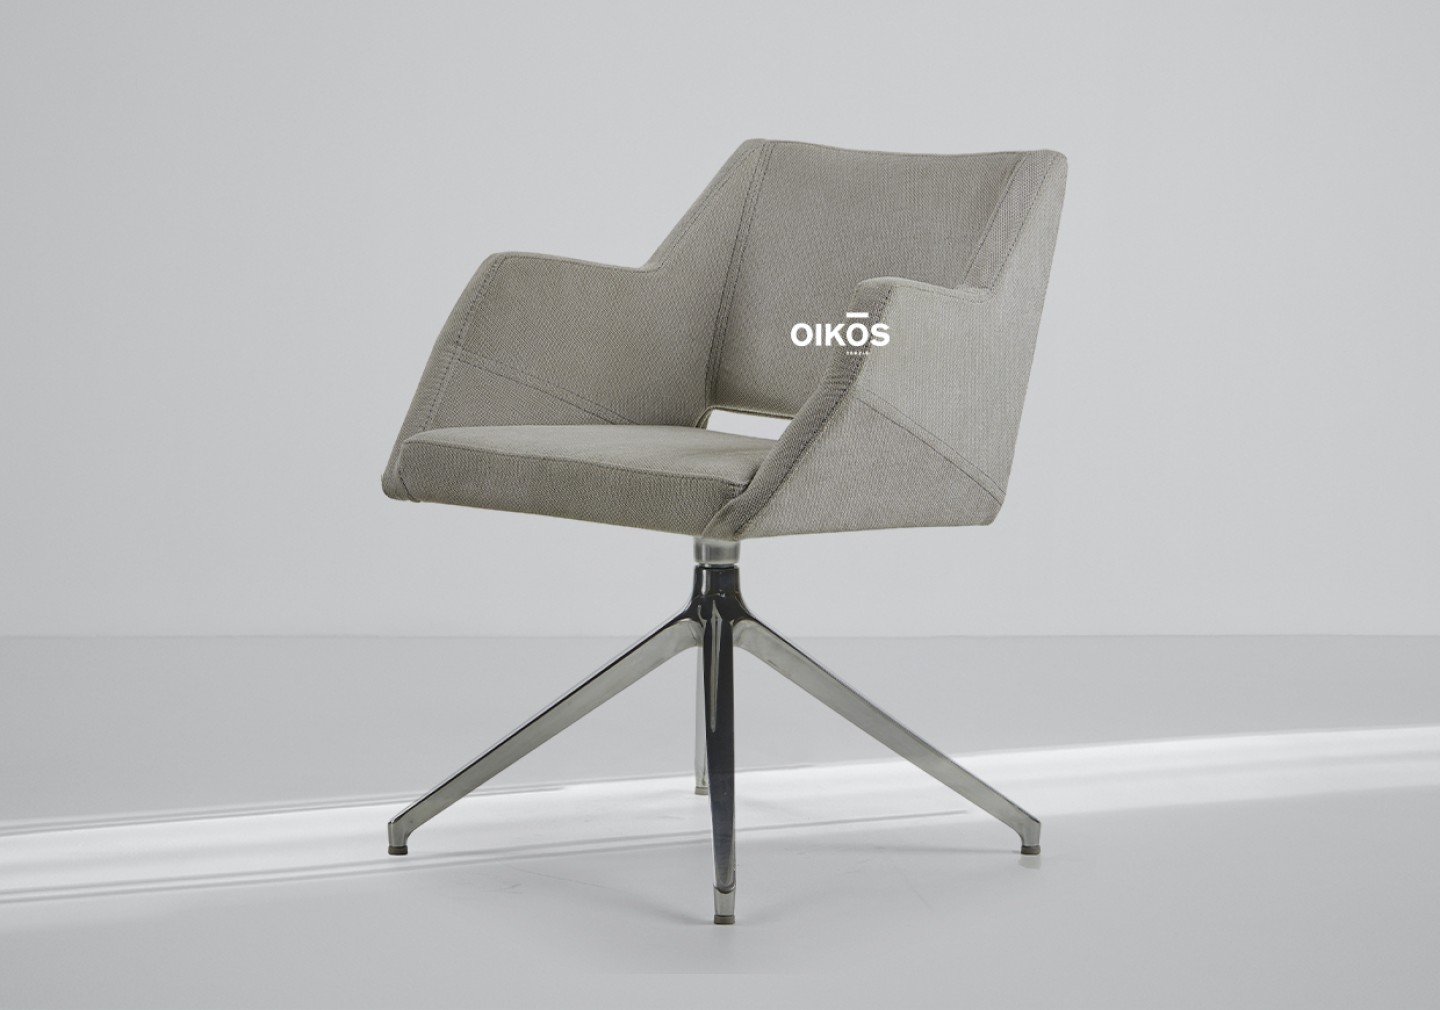 THE NEW PHOENIX DINING CHAIR